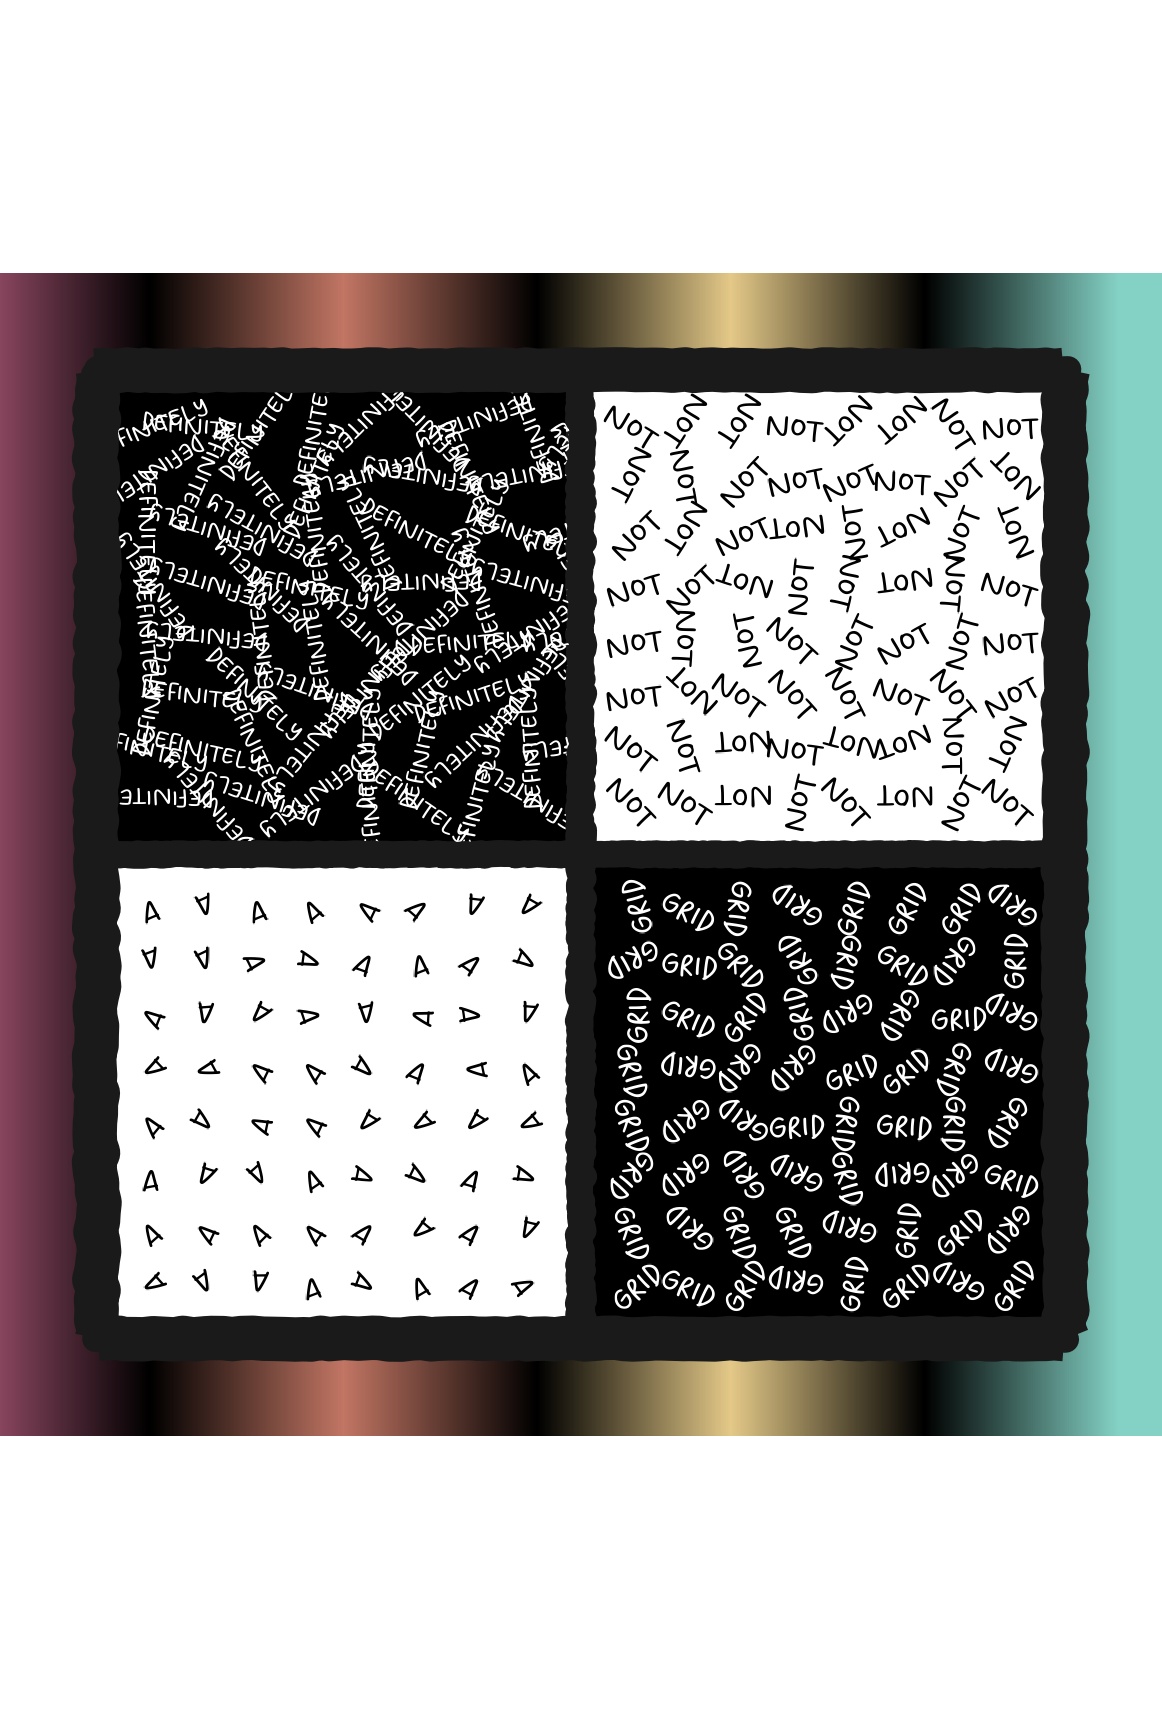 A generative art piece that consists of four boxes that suspiciously looks like a grid. Each cube is black or white and has the words definitely not a grid scrawled about in them. The boxes are on a light pastel background of four colors.